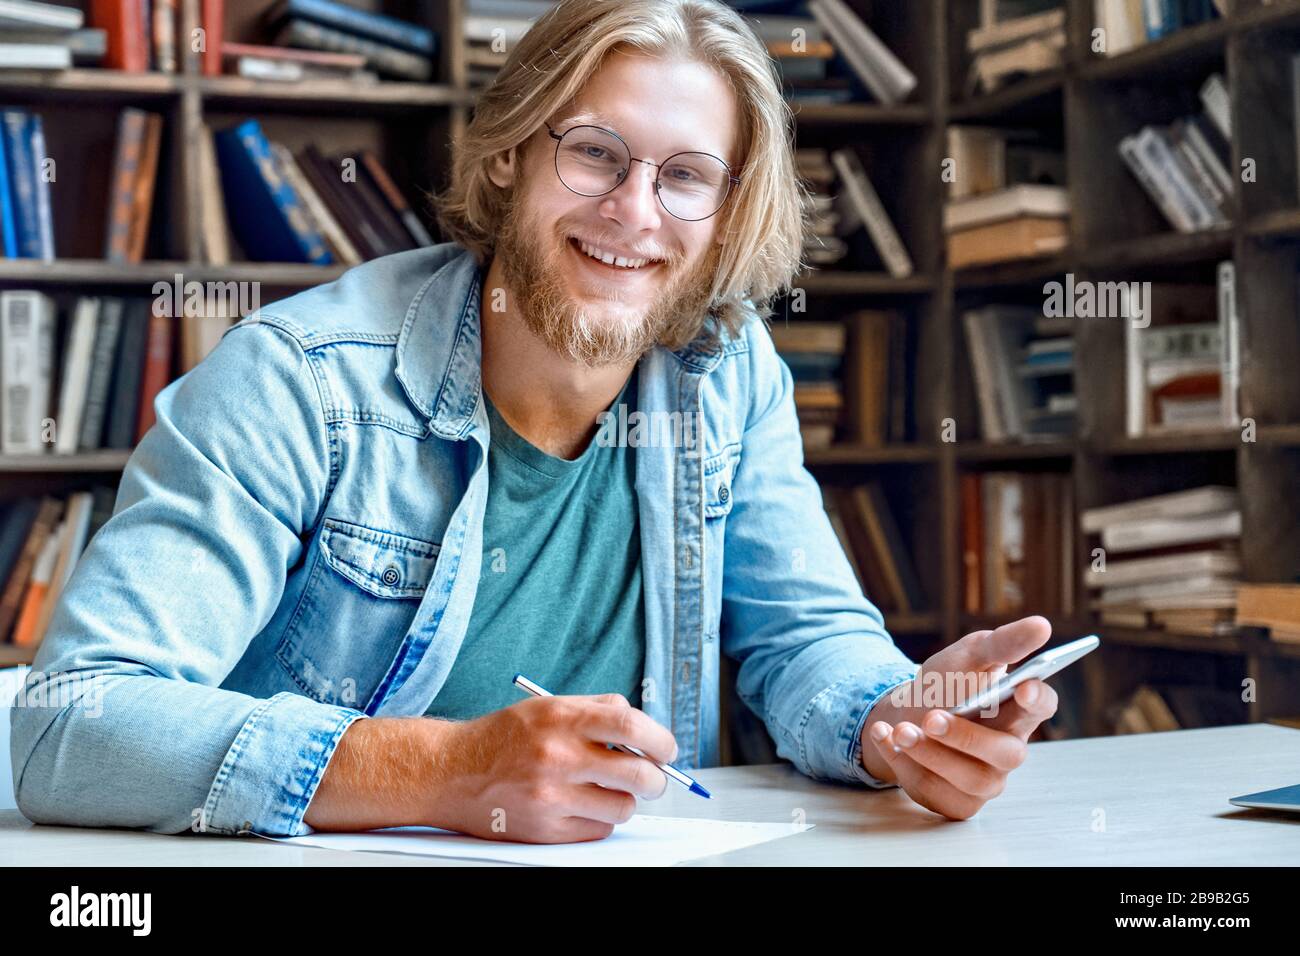 Portrait of happy smiling young student at library desk hold modern smartphone. Stock Photo